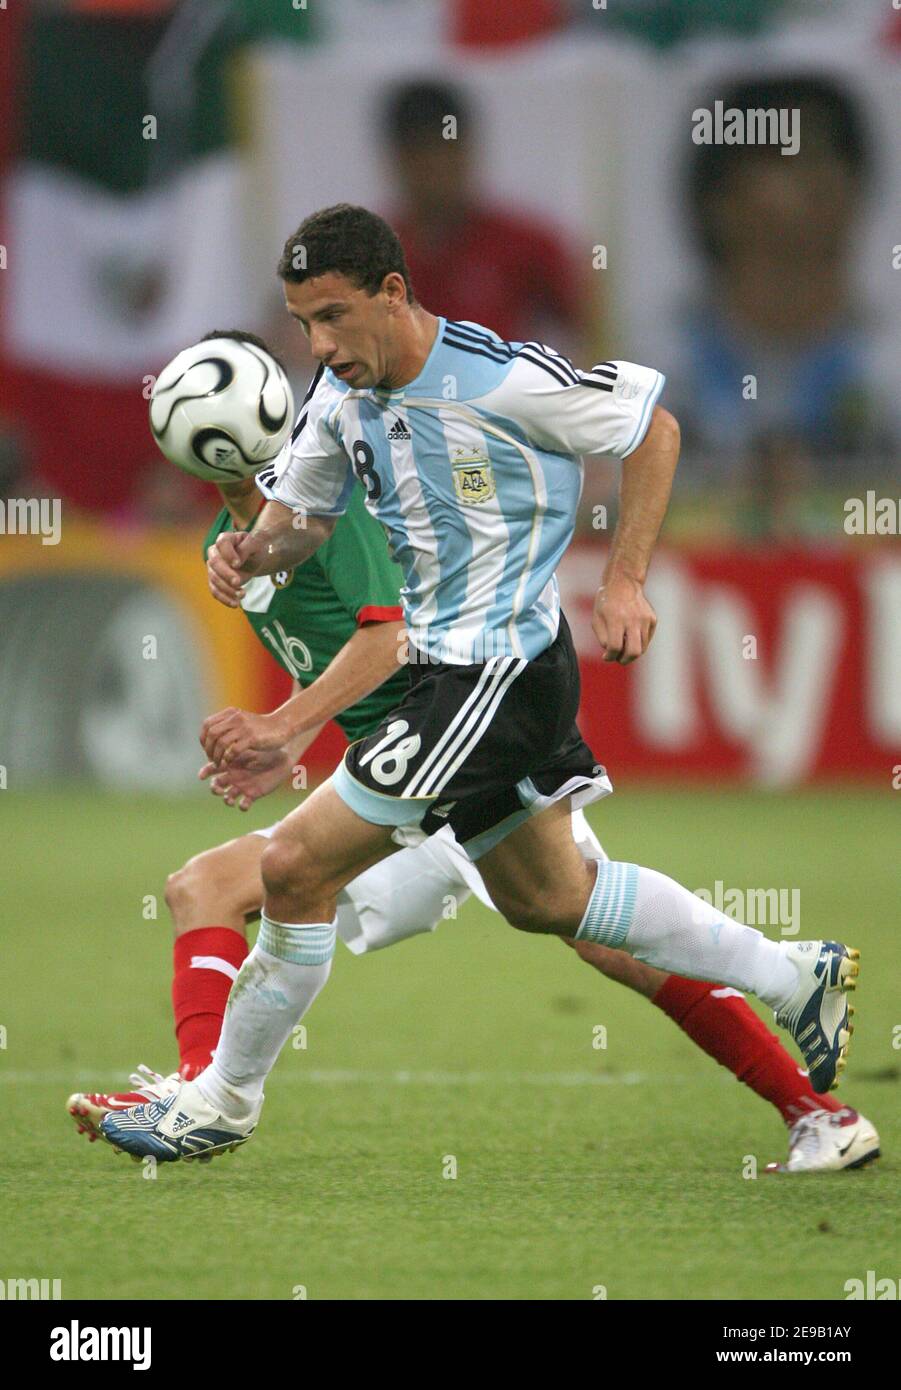 Argentina's Maxi Rodriguez during the World Cup 2006, Second round, Argentina vs Mexico at the Zentralstadion stadium in Leipzig, Germany on June 24, 2006. Argentina won 2-1. Photo by Gouhier-Hahn-Orban/Cameleon/ABACAPRESS.COM Stock Photo